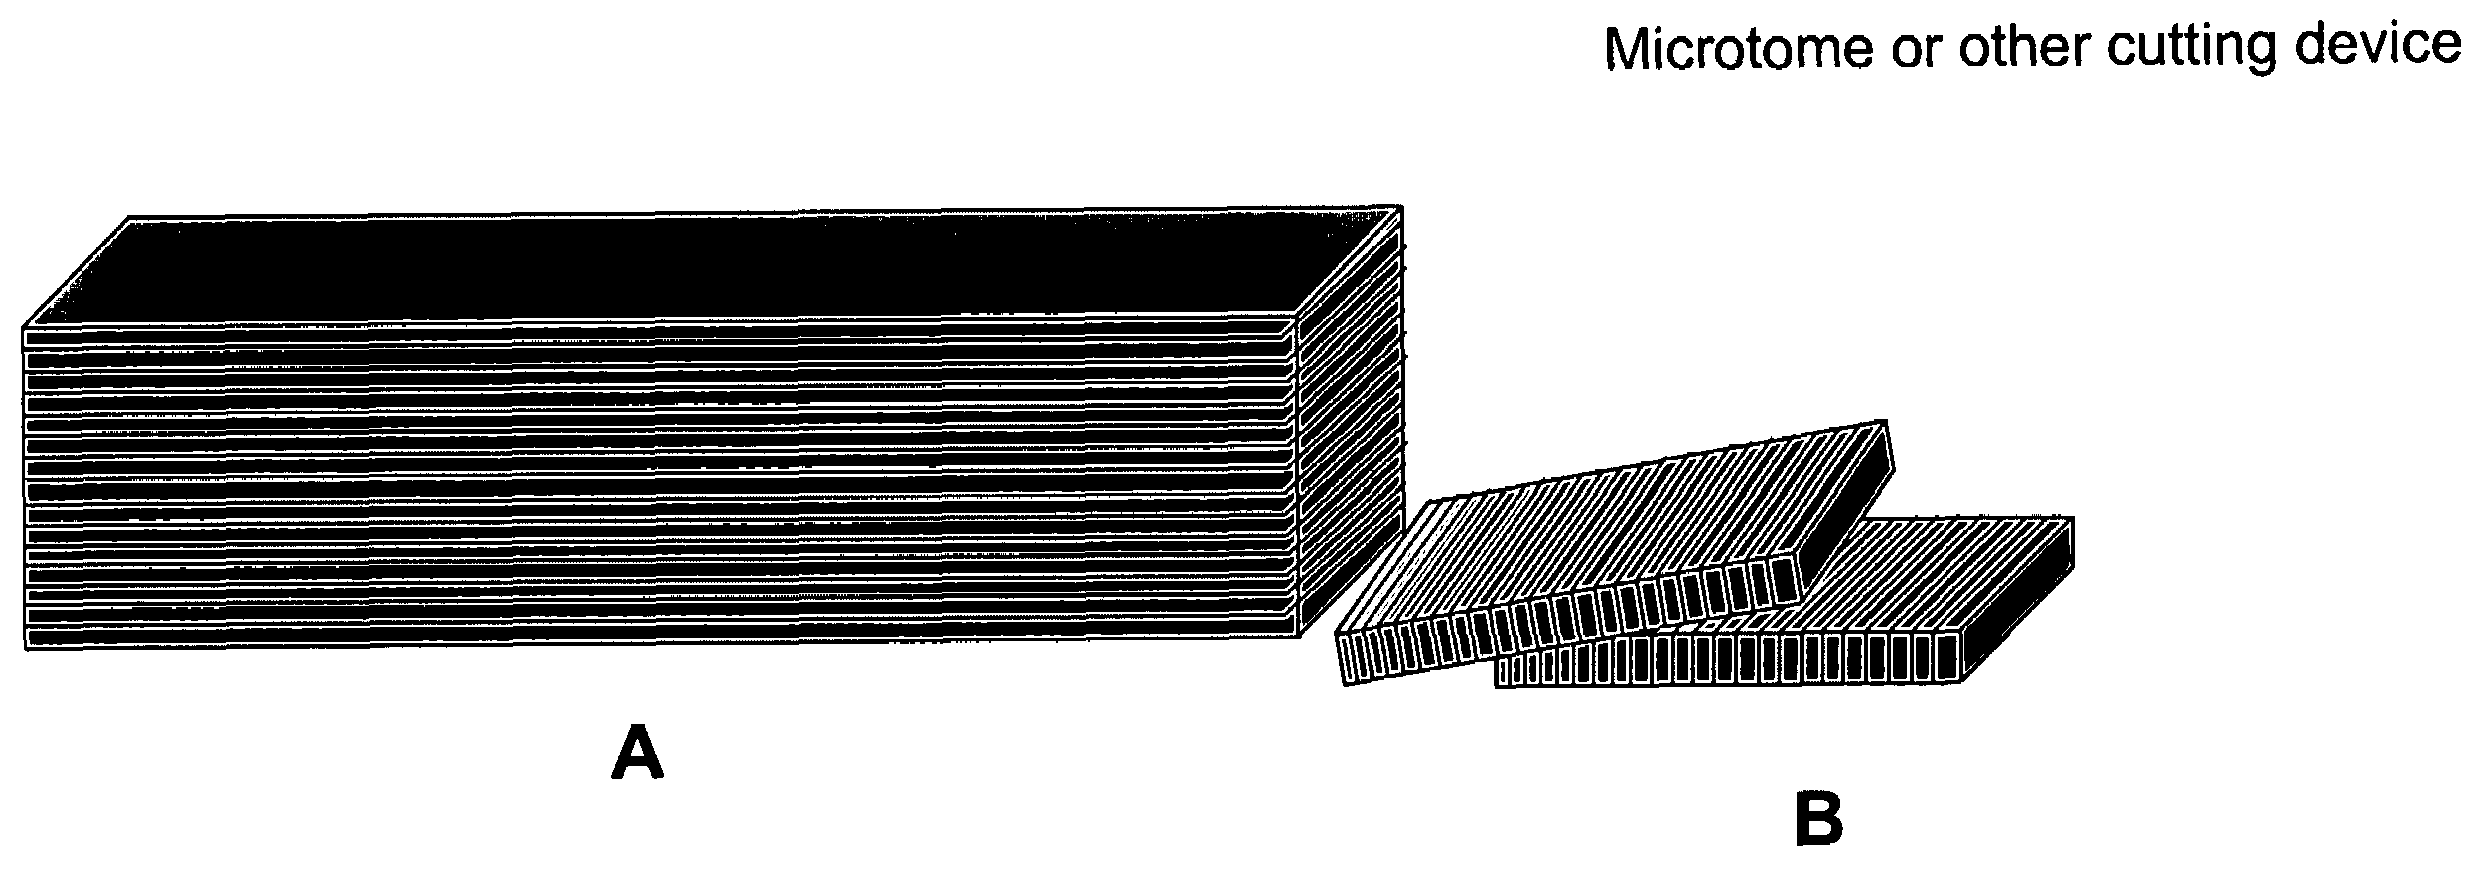 Self orienting micro plates of thermally conducting material as component in thermal paste or adhesive